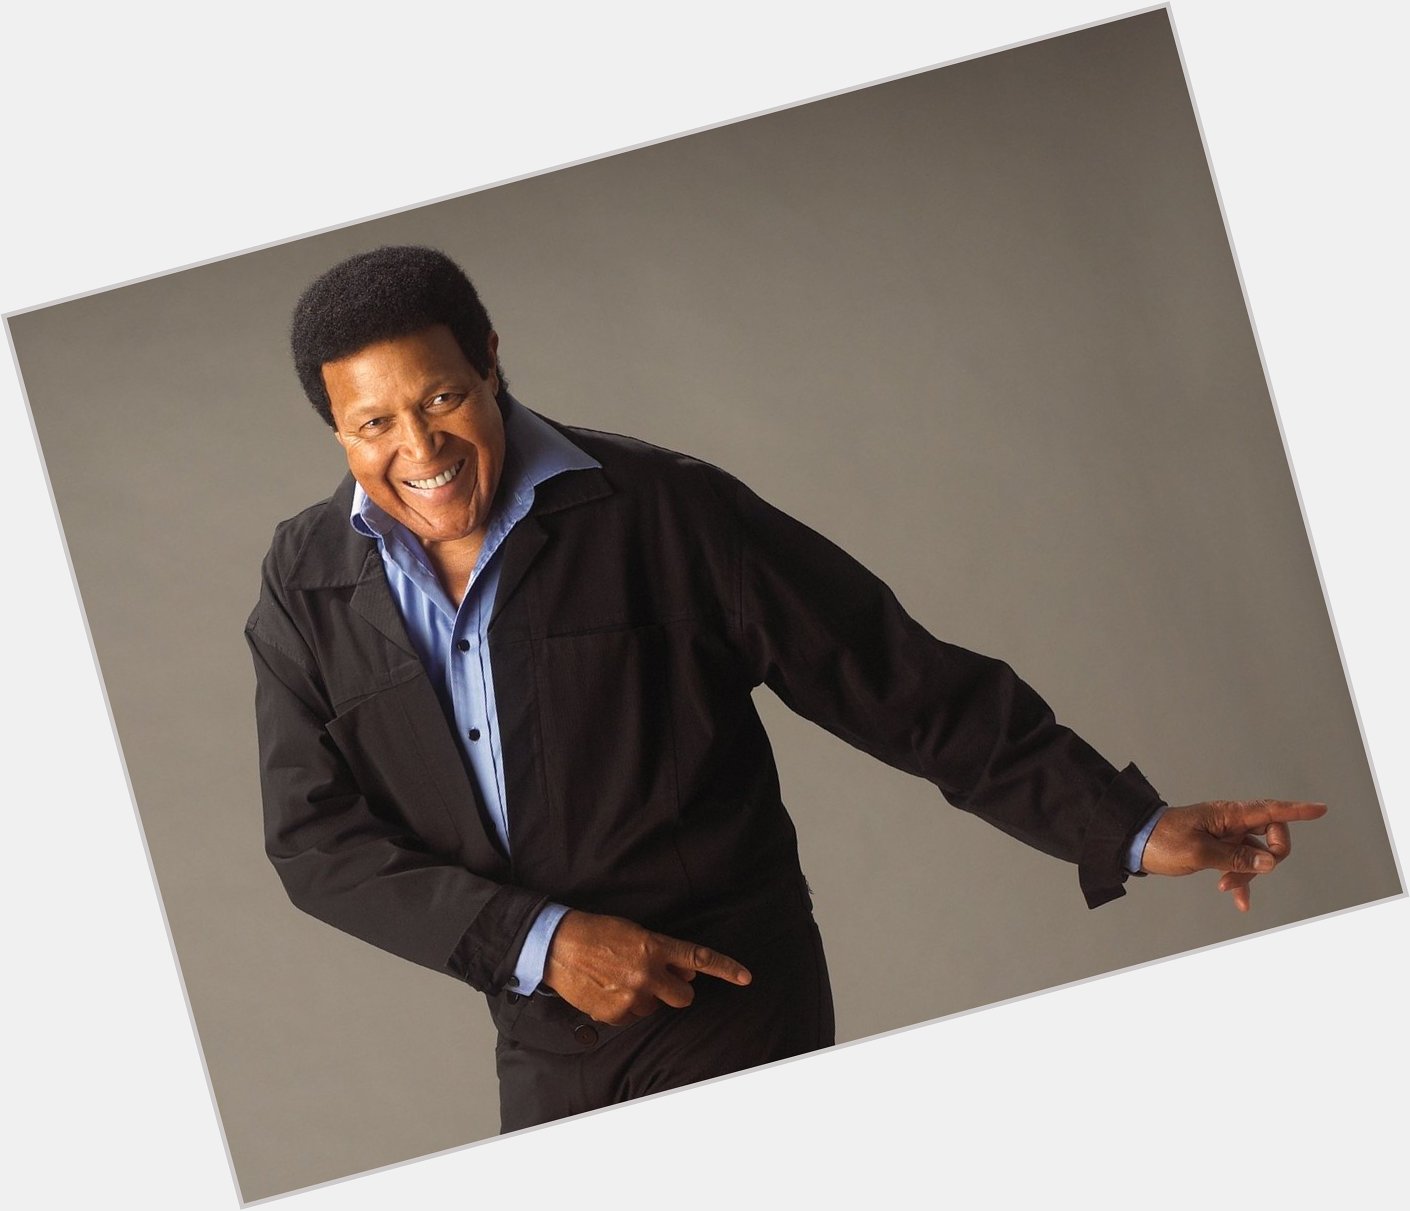 A Big BOSS Happy Birthday today to Chubby Checker from all of us at The Boss!  